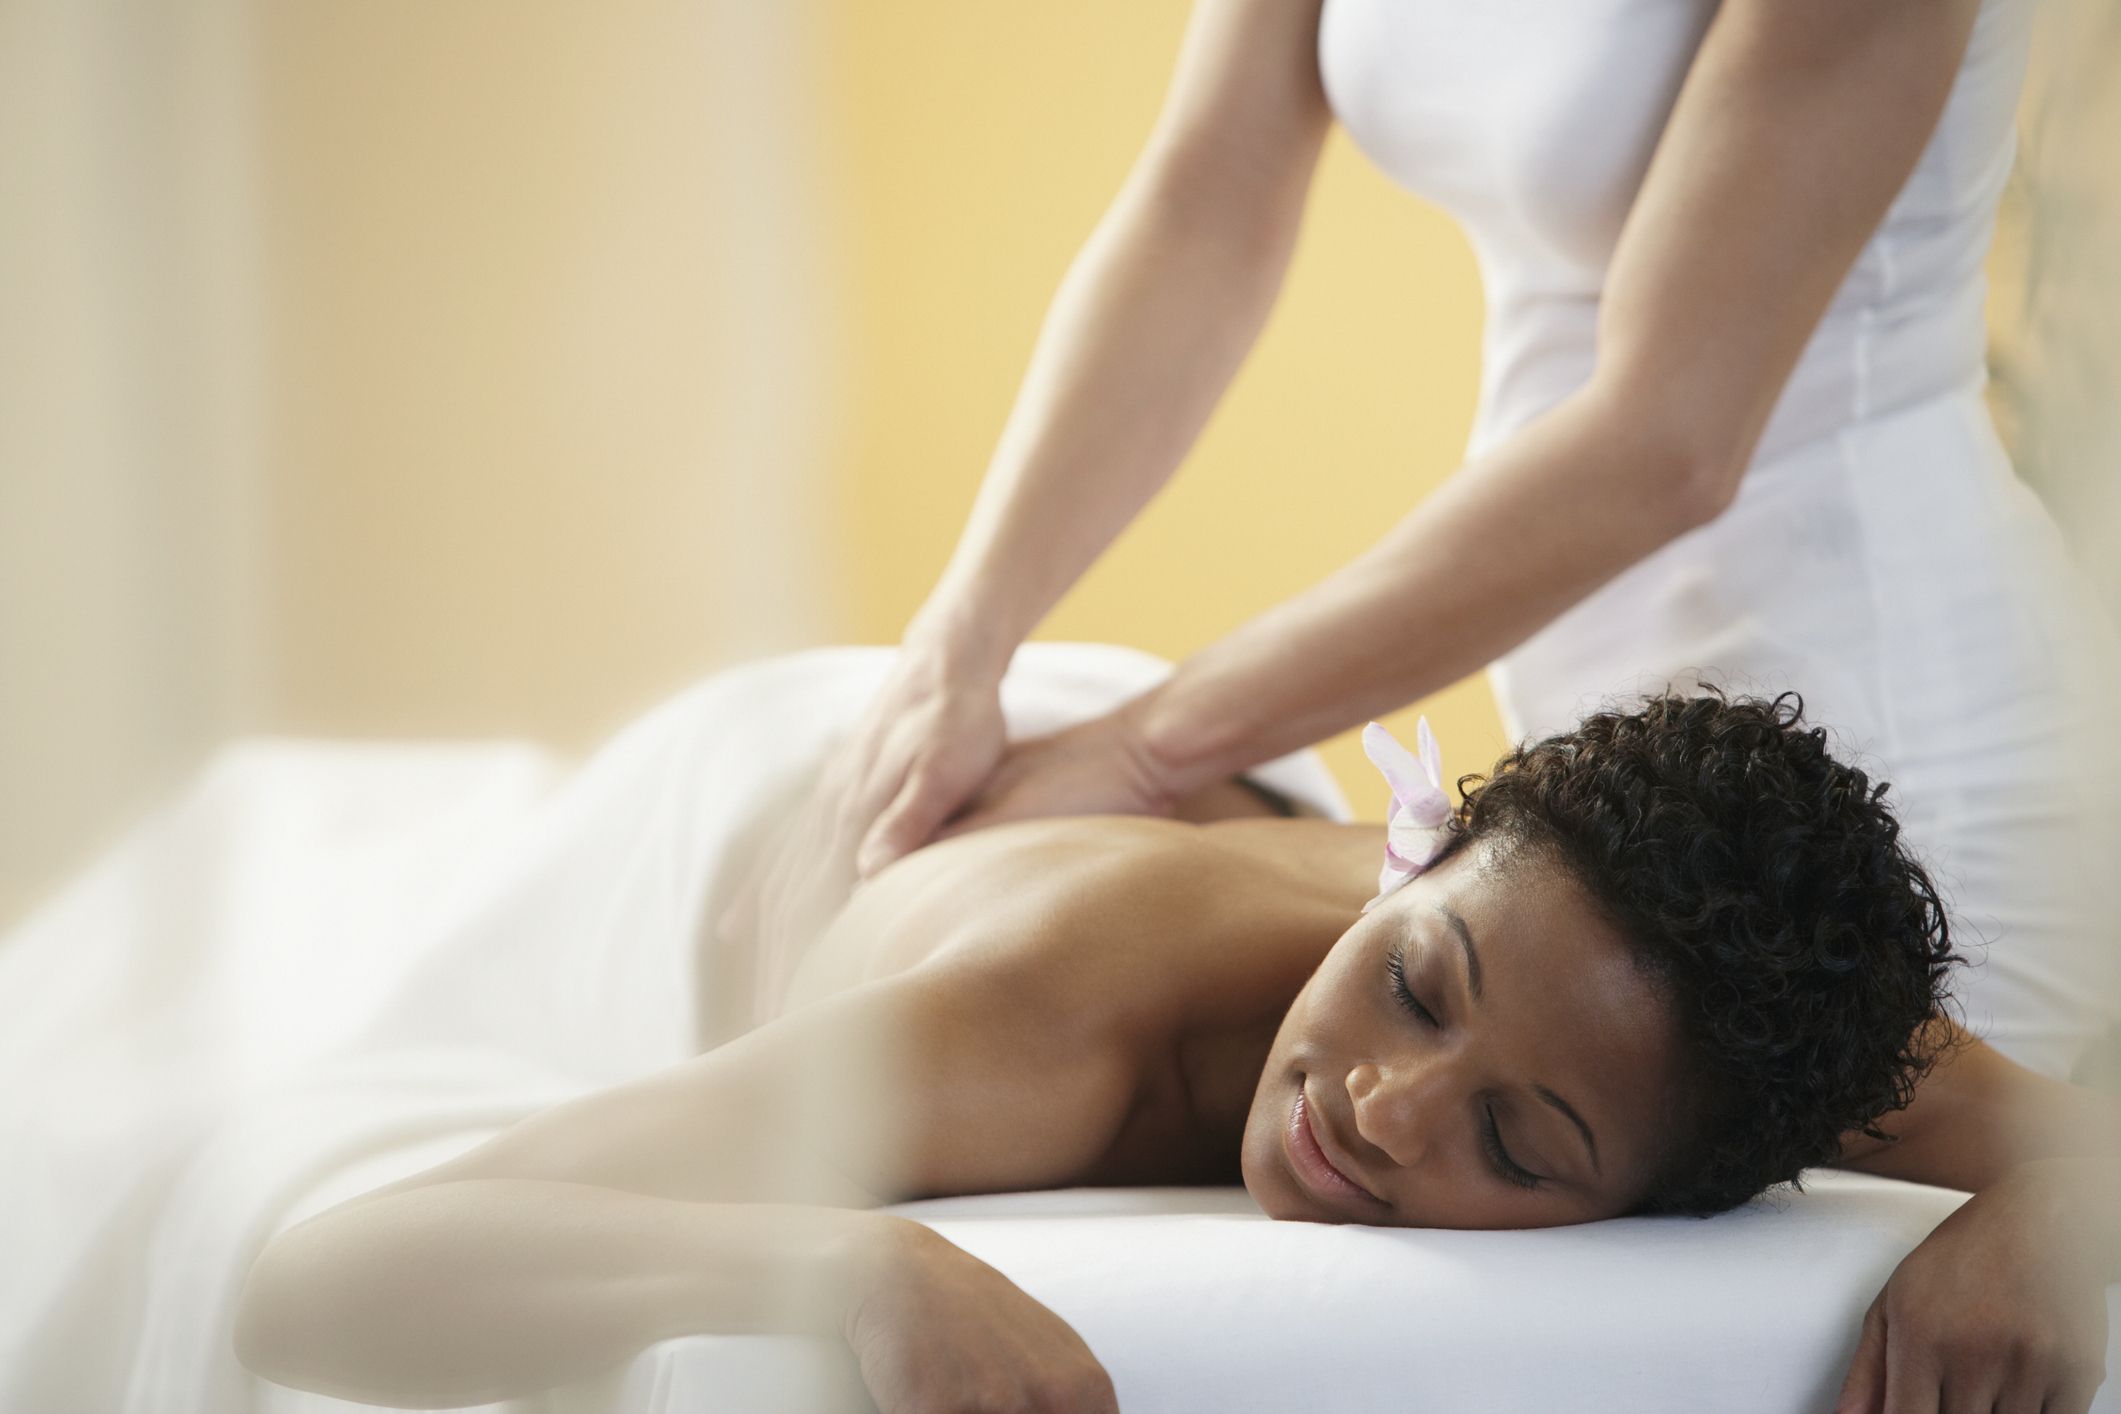 Lymphatic Drainage Massage Benefits And Methods, Per Experts photo photo